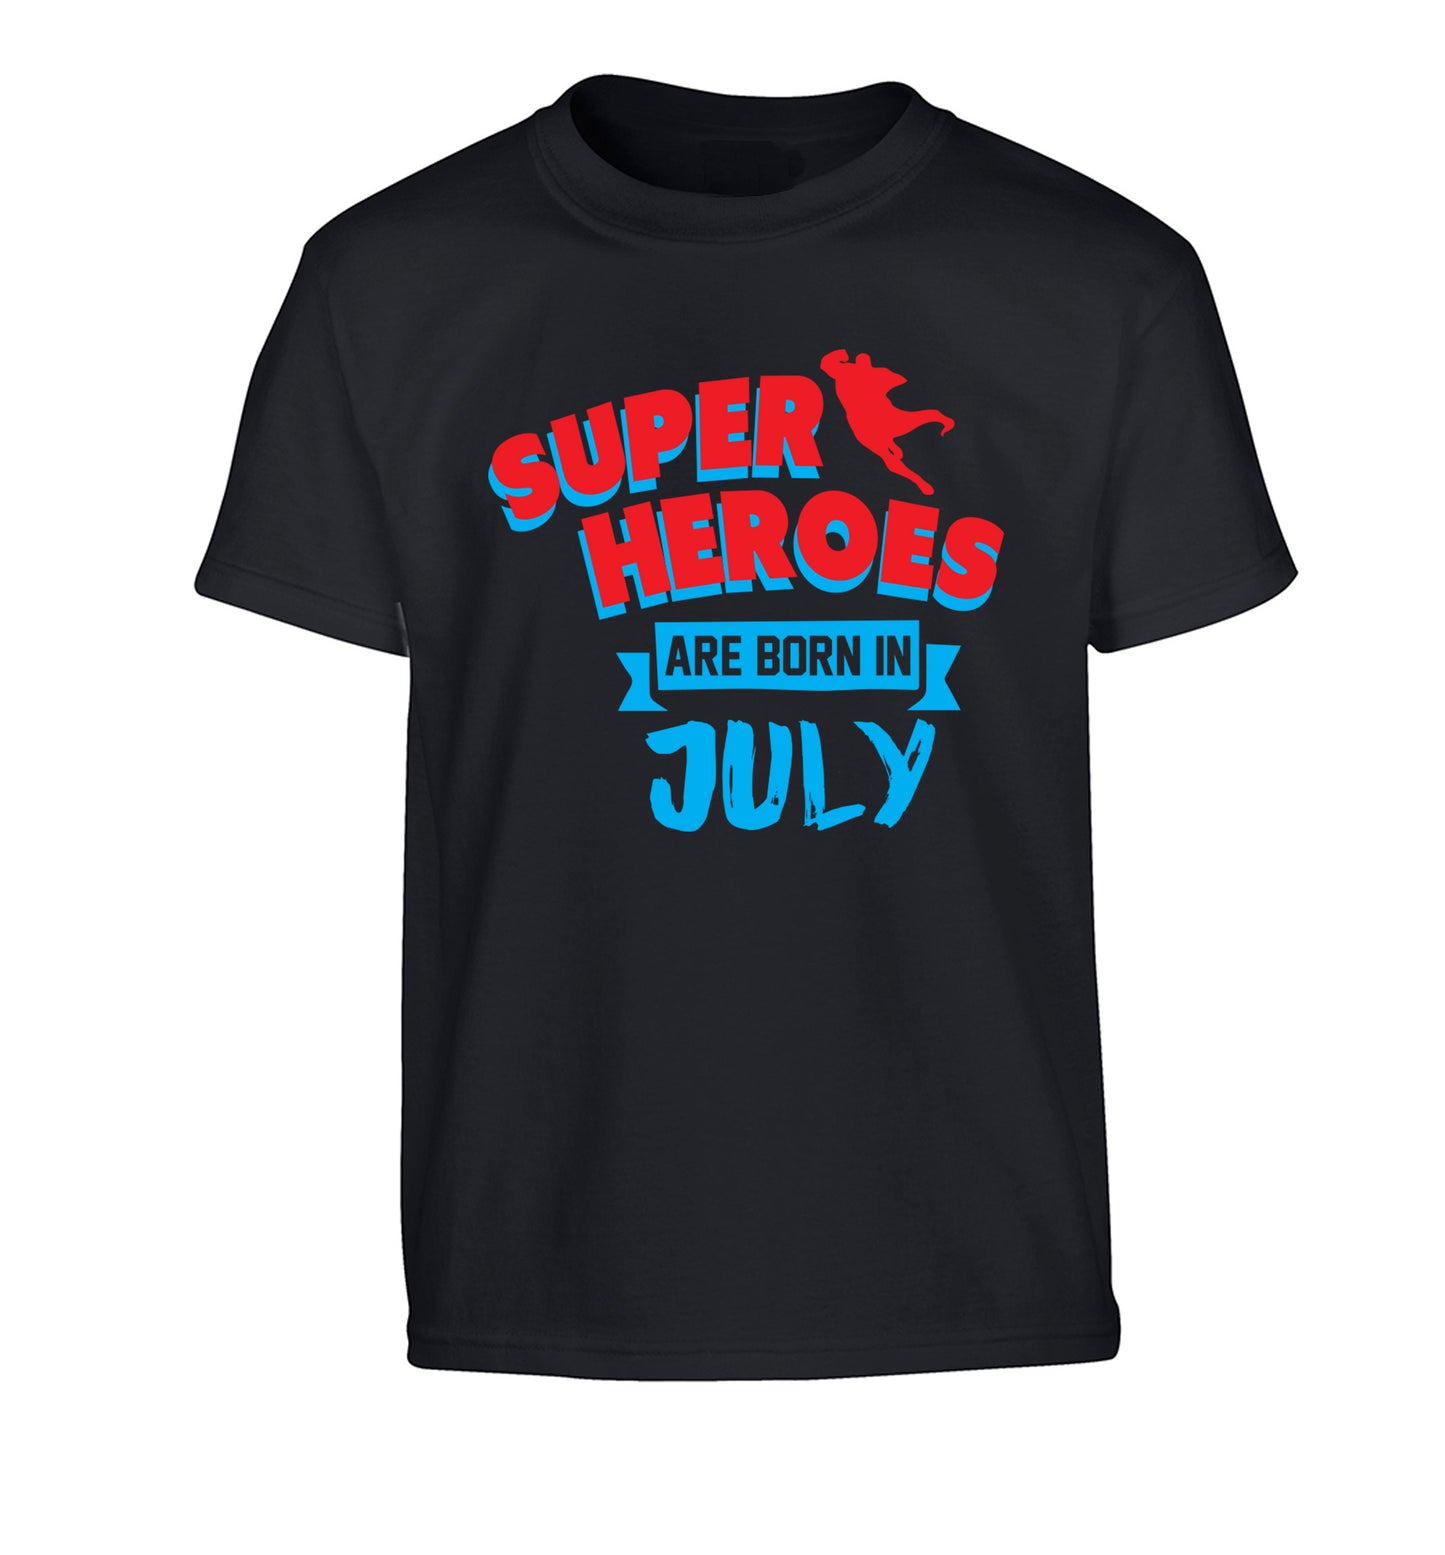 Superheroes are born in July Children's black Tshirt 12-13 Years